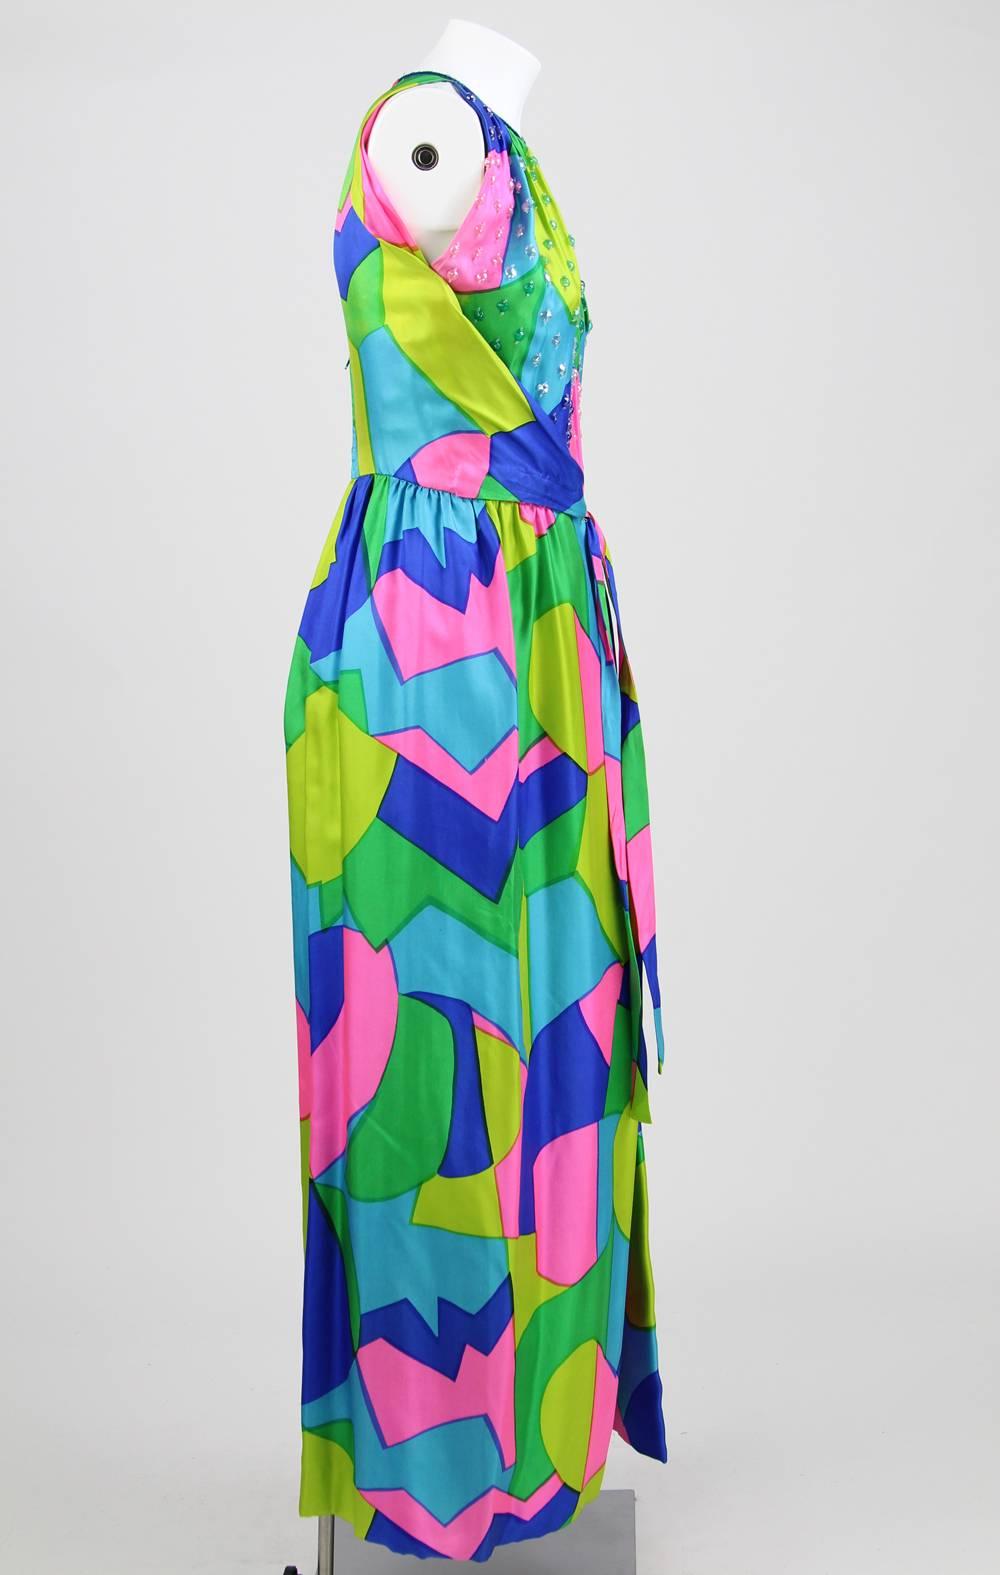 Lively multicolor tailored sleeveless jumpsuit with an abstract pattern. It features wide legs (it looks like a dress), multicolor transparent sequins on the bodice and the collar, and a delicate built-in wrap-around sleeveless cardigan. Fastened by